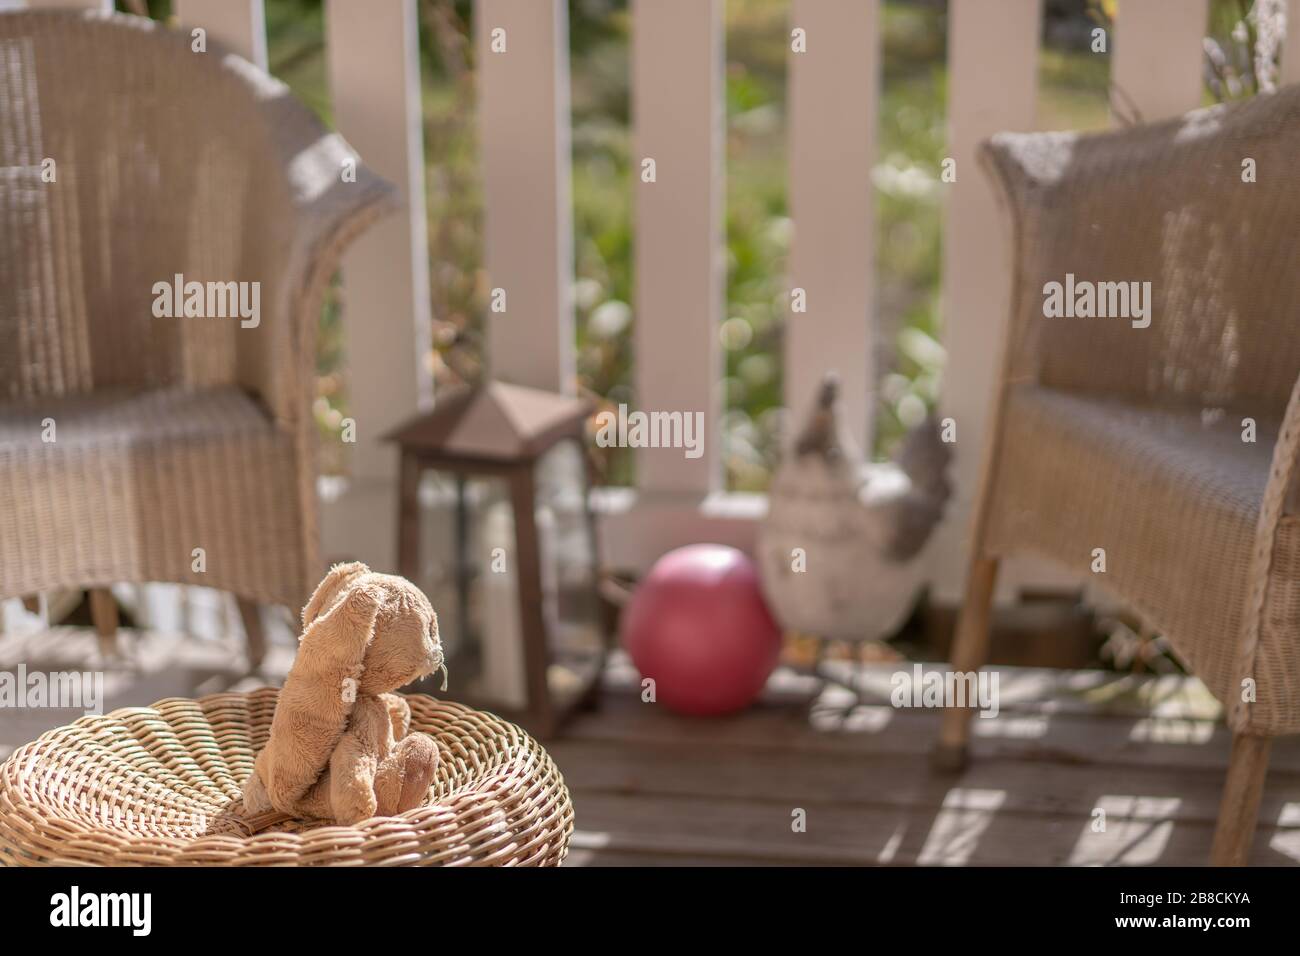 Stuffed toy easter bunny sitting on a wicker chair on the veranda in the sun, looking to pink ball. High angle view, close up, concept. Stock Photo